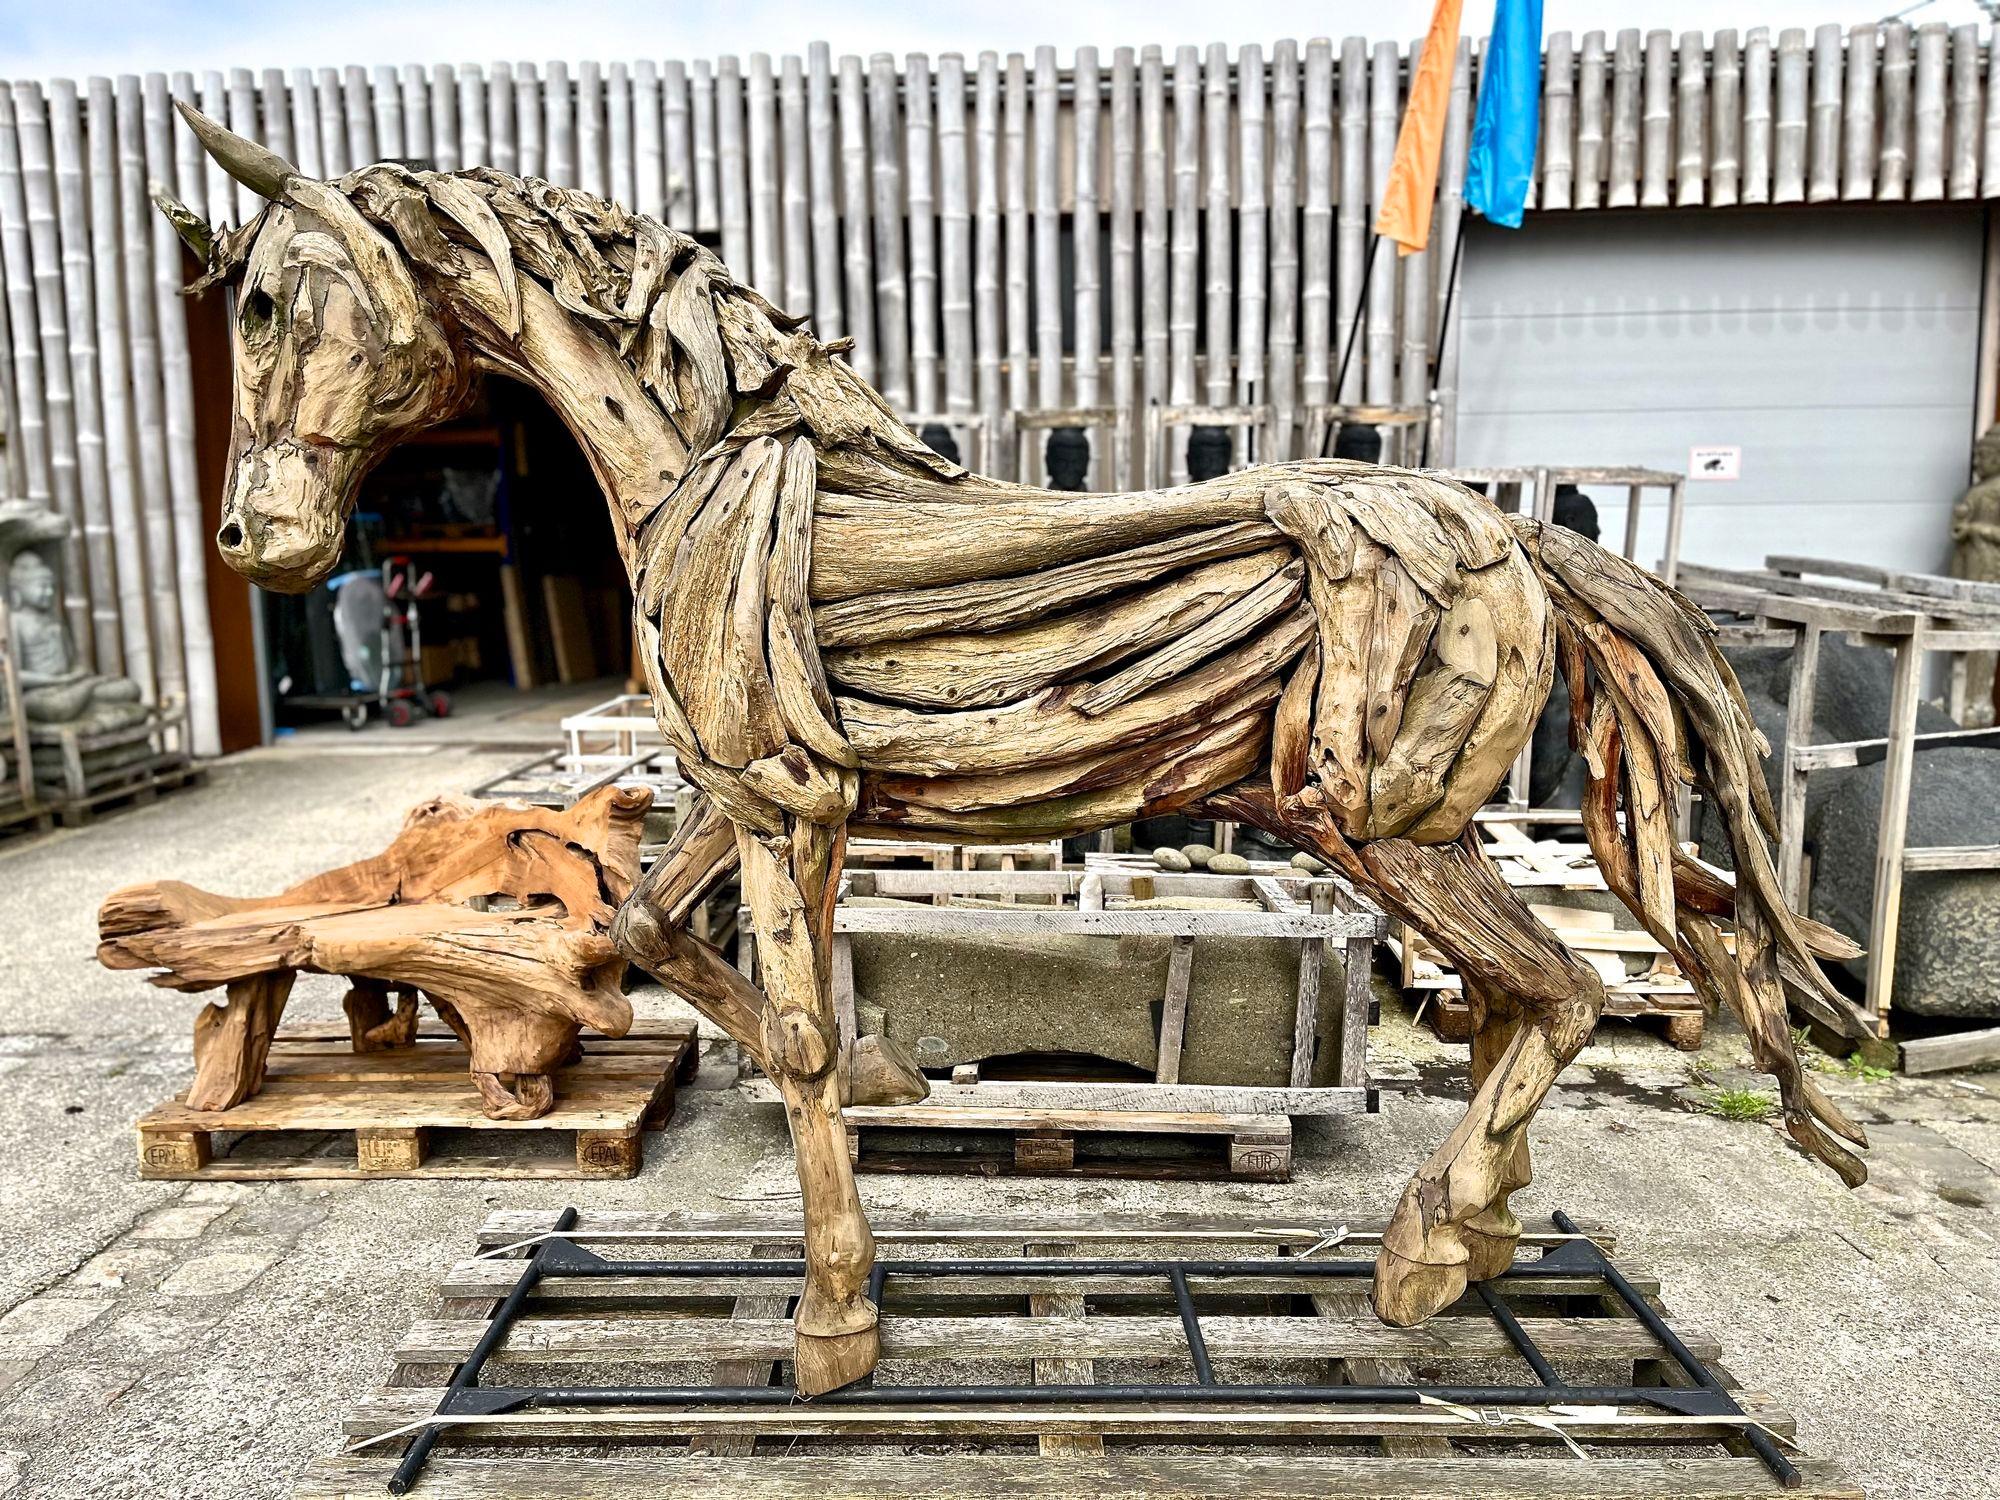 One of a kind lifesize horse sculpture artfully handcrafted by an exceptional indonesian wood artist. Elaborately created out of unique handpicked driftwood pieces that were collected on the beaches of Java, this horse impresses with absolute